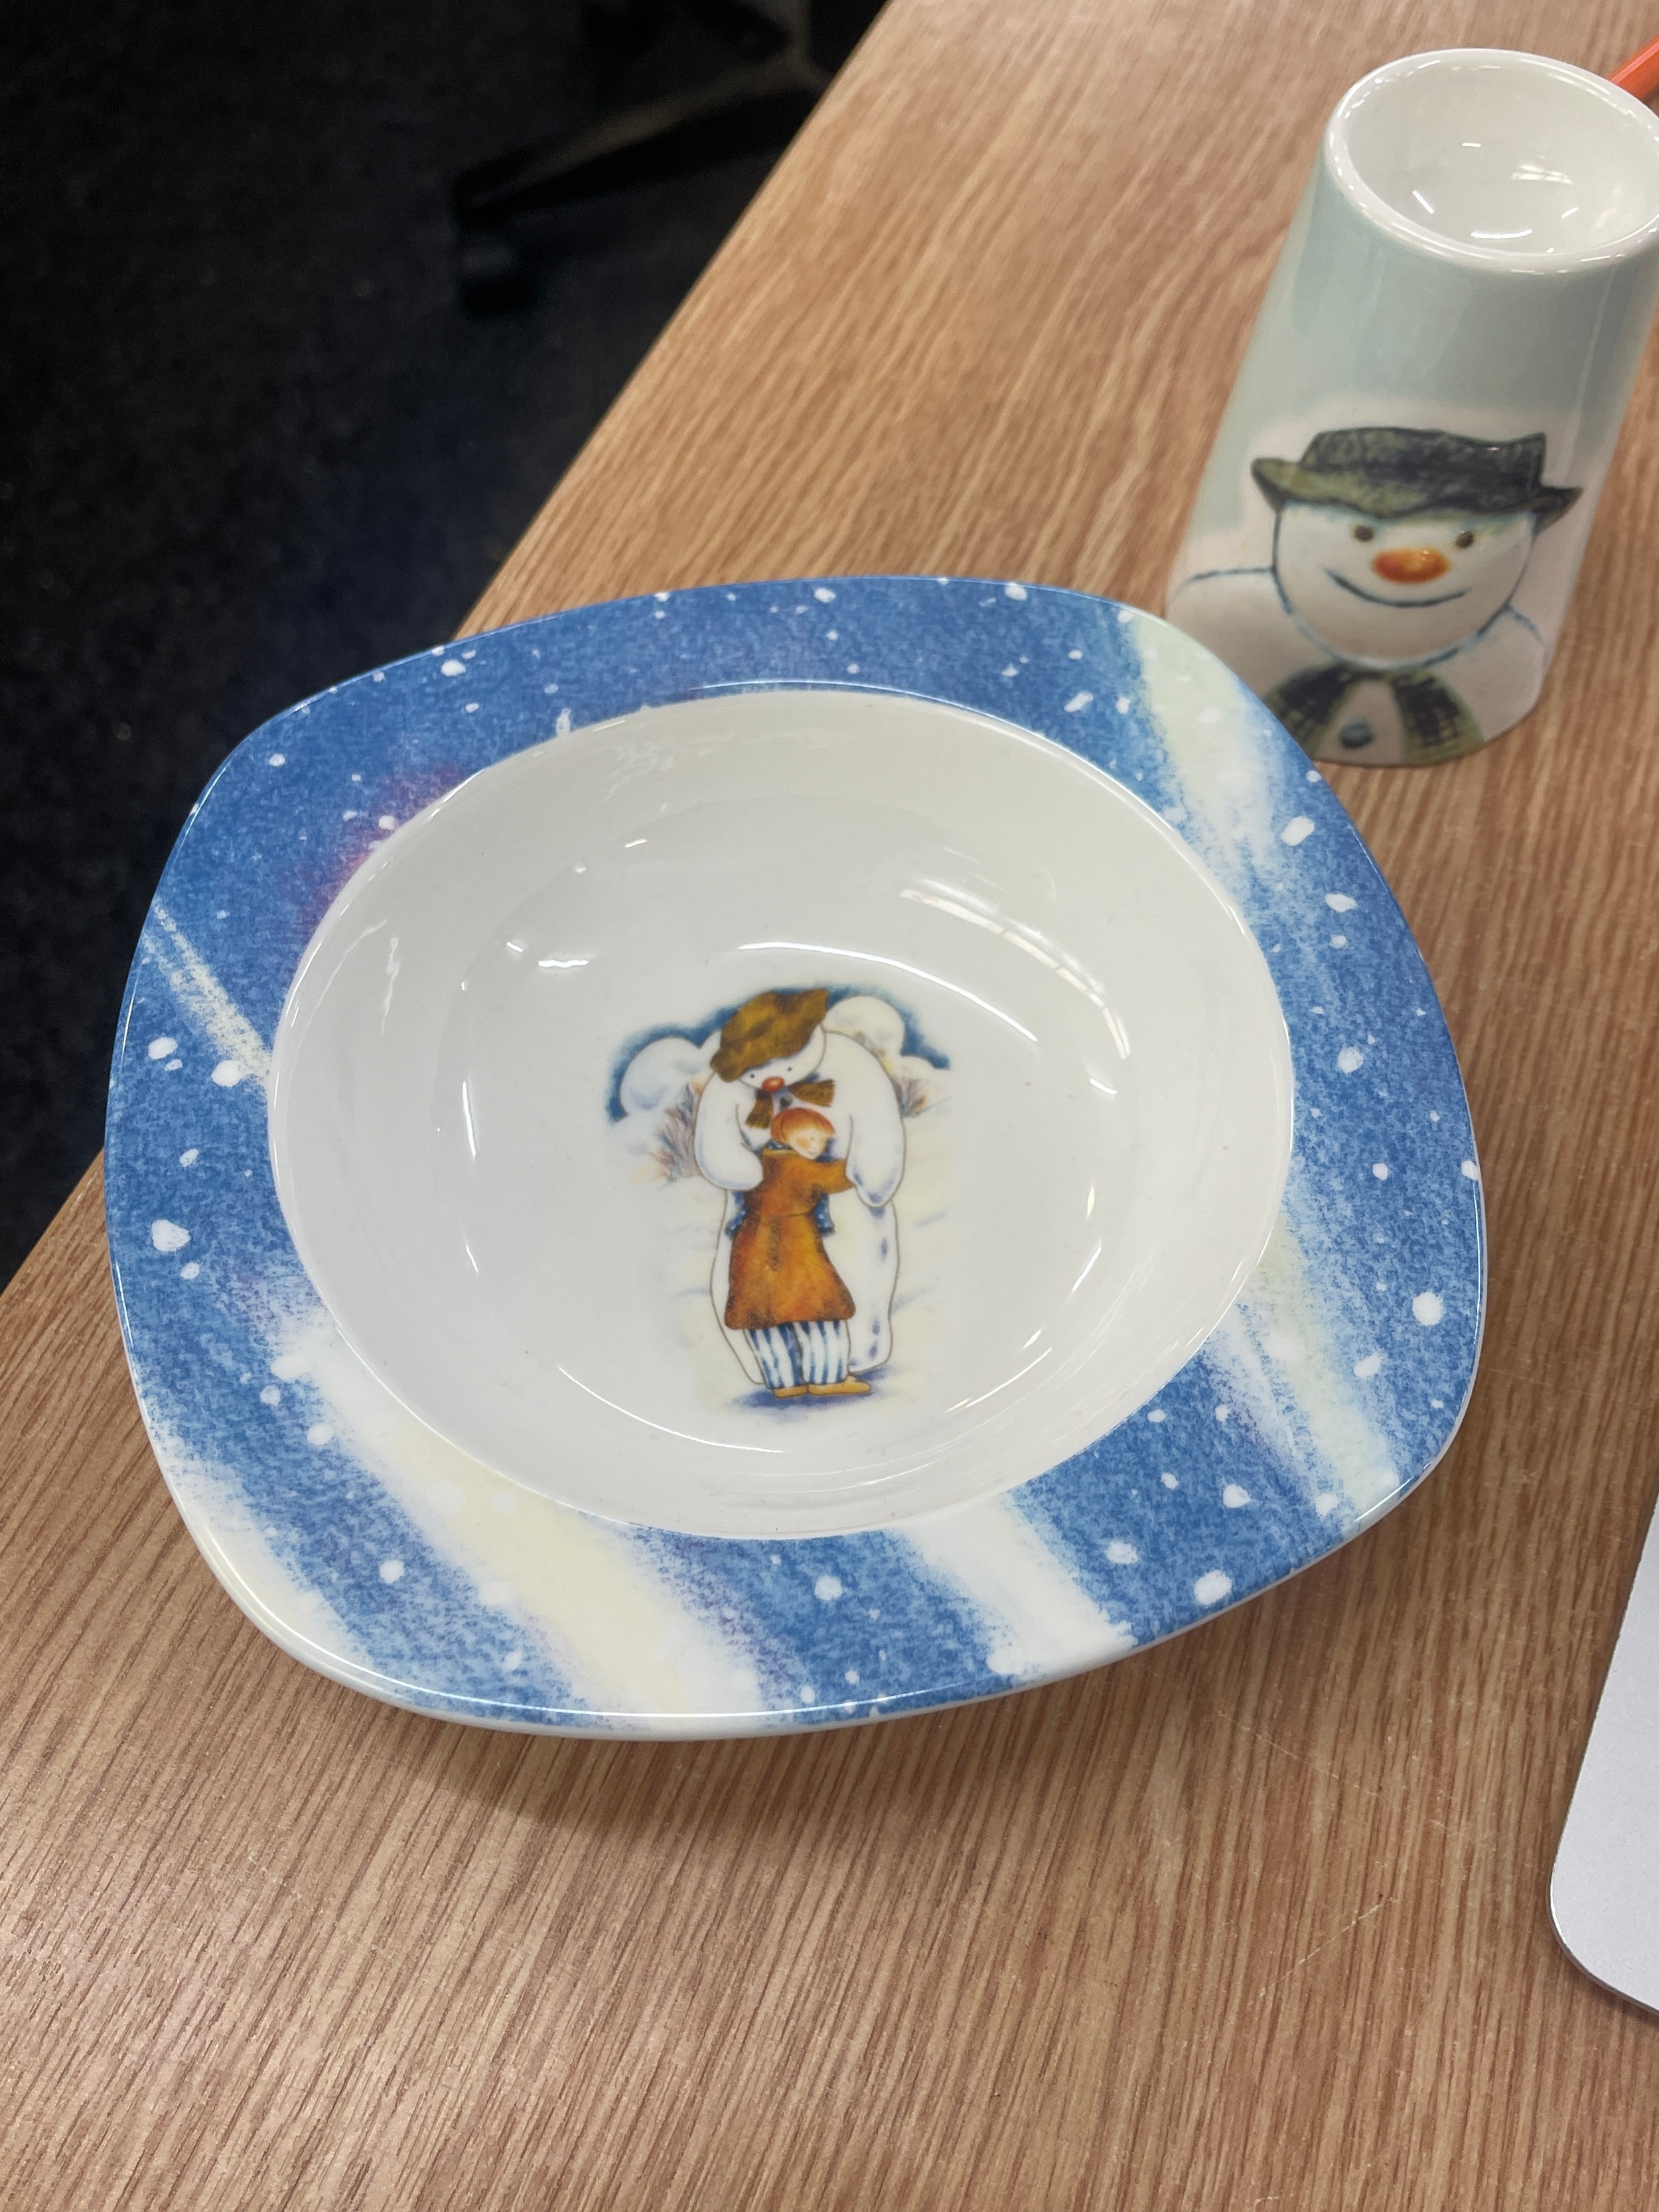 The Snow man pottery, bowl and egg cup - Image 2 of 3